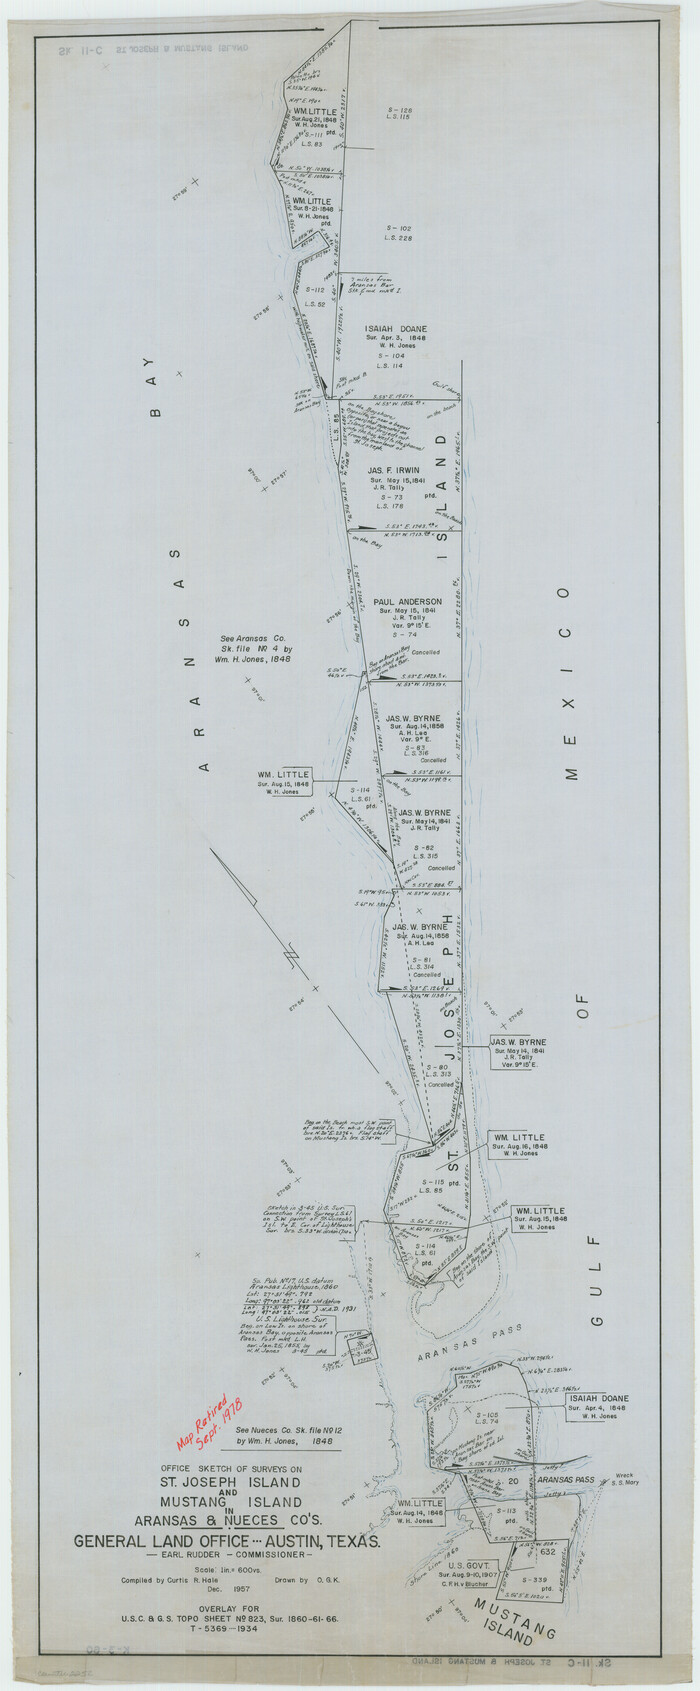 2252, Office sketch of surveys on St. Joseph Island and Mustang Island in Aransas & Nueces Cos., General Map Collection